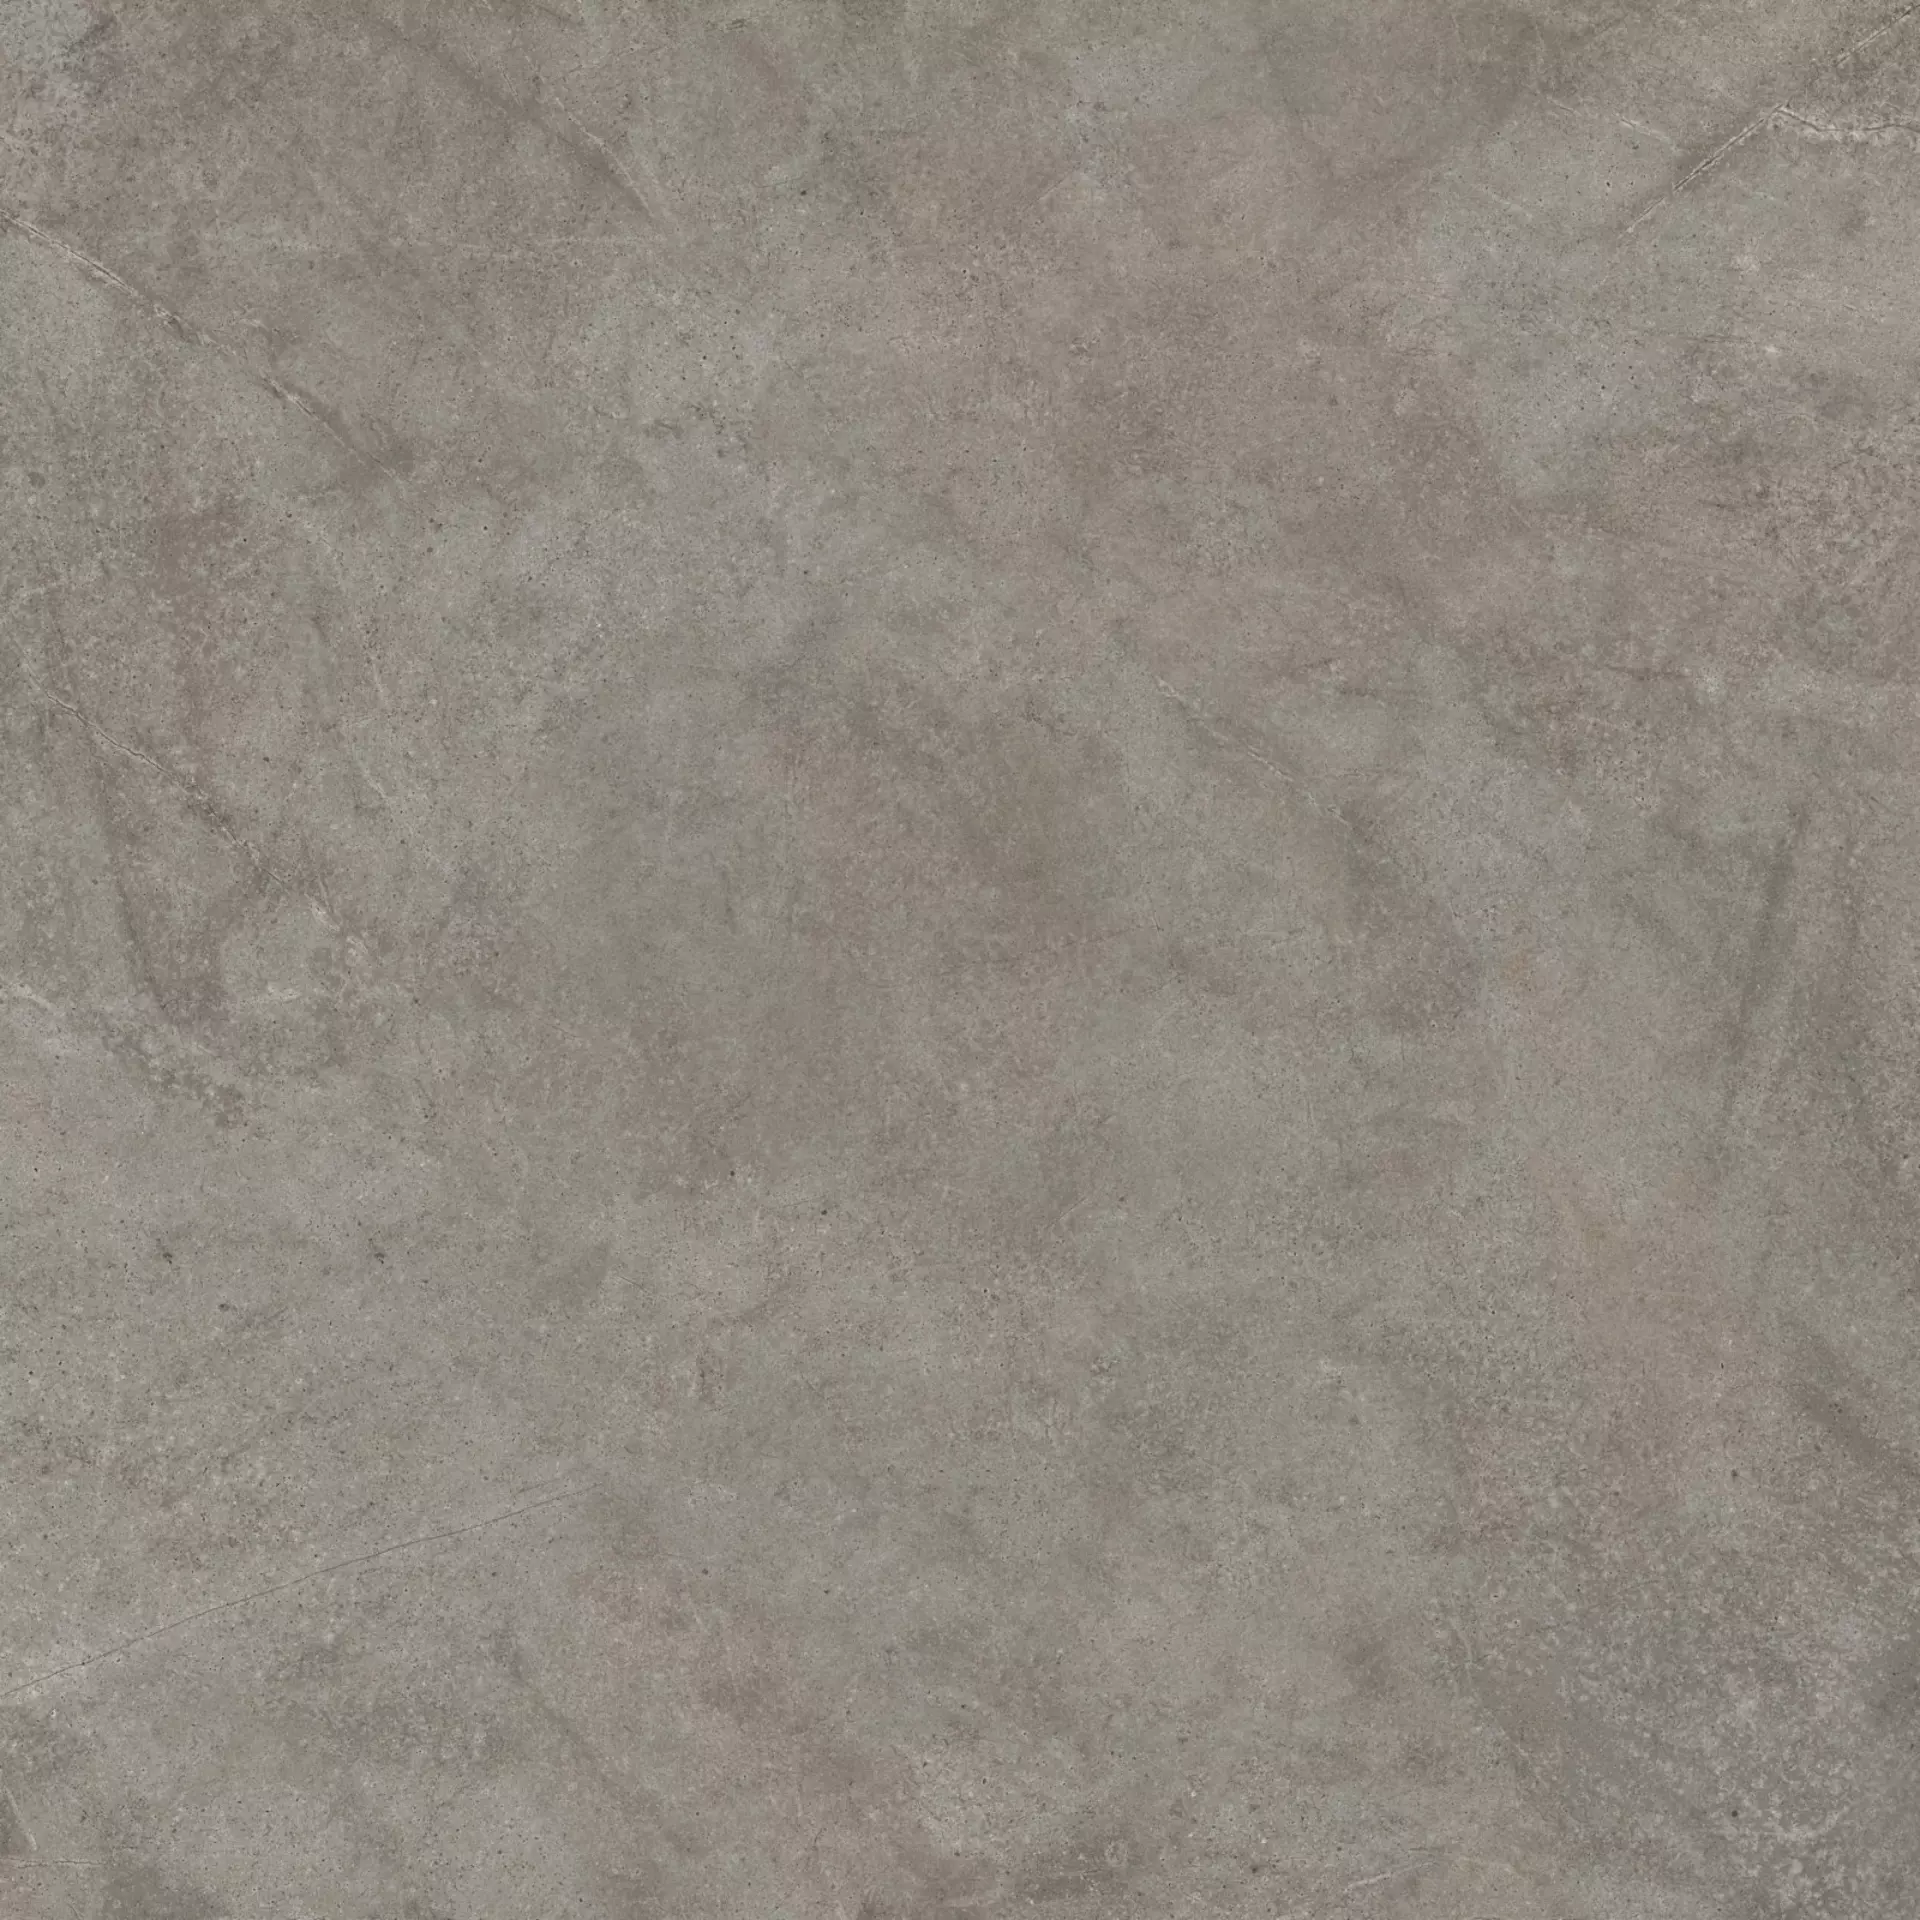 ABK Atlantis Taupe Naturale PF60005854 120x120cm rectified 8,5mm